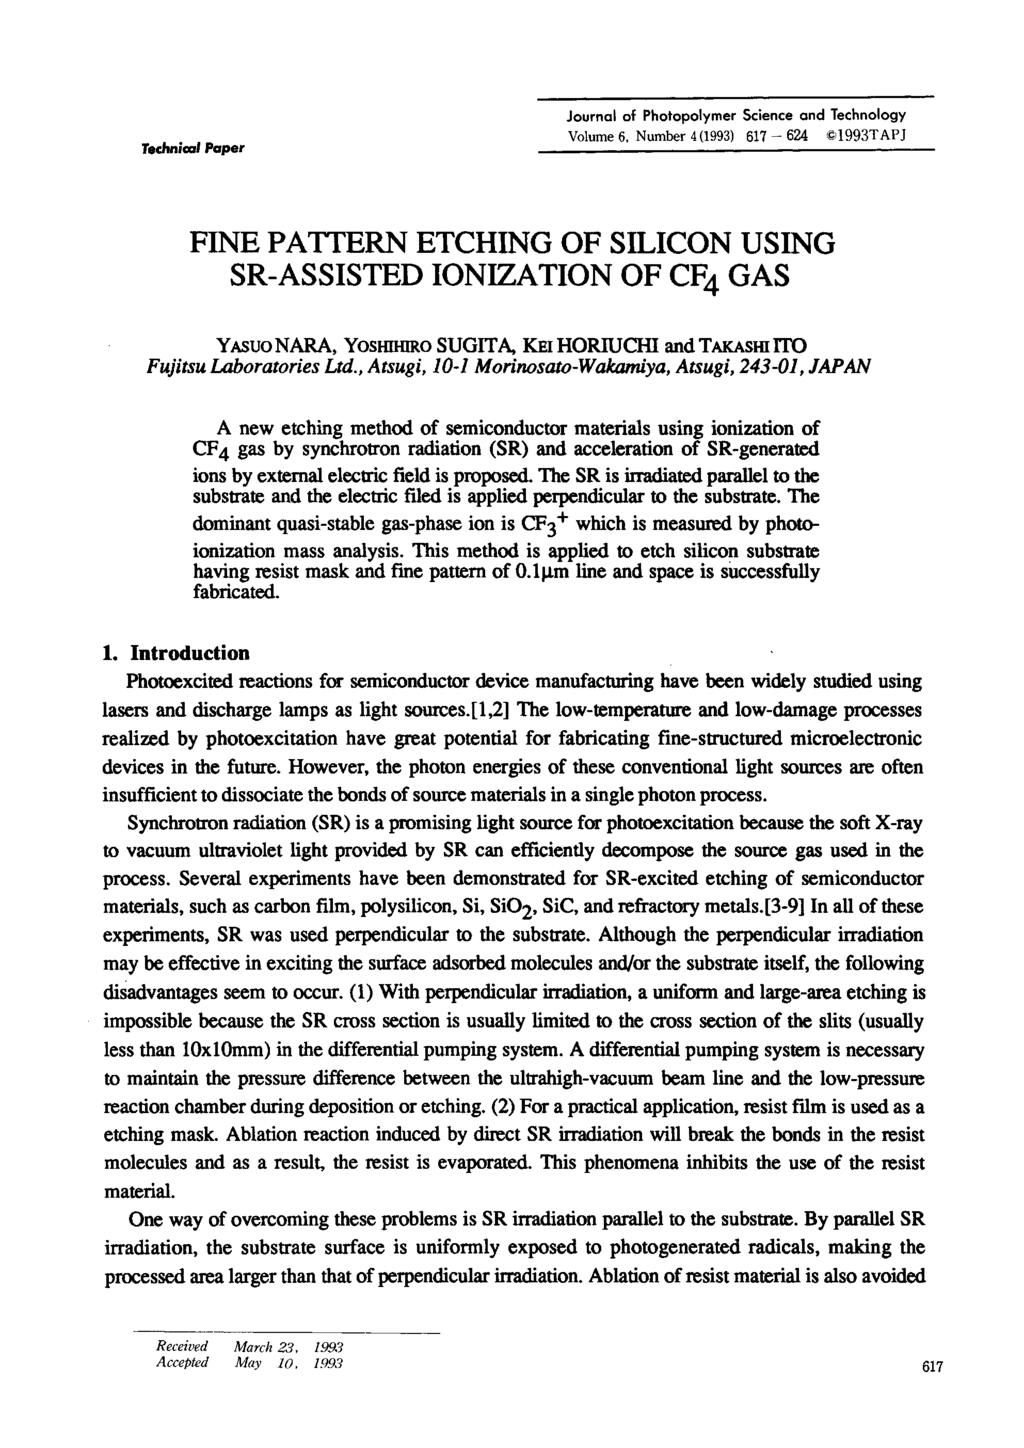 Technical Paper Journal of Photopolymer Science and Technology Volume 6, Number 4(1993) 617-624 1993TAPJ FINE PATTERN ETCHING OF SILICON USING SR-ASSISTED IONIZATION OF CF4 GAS YASUO NARA, YosHIHto